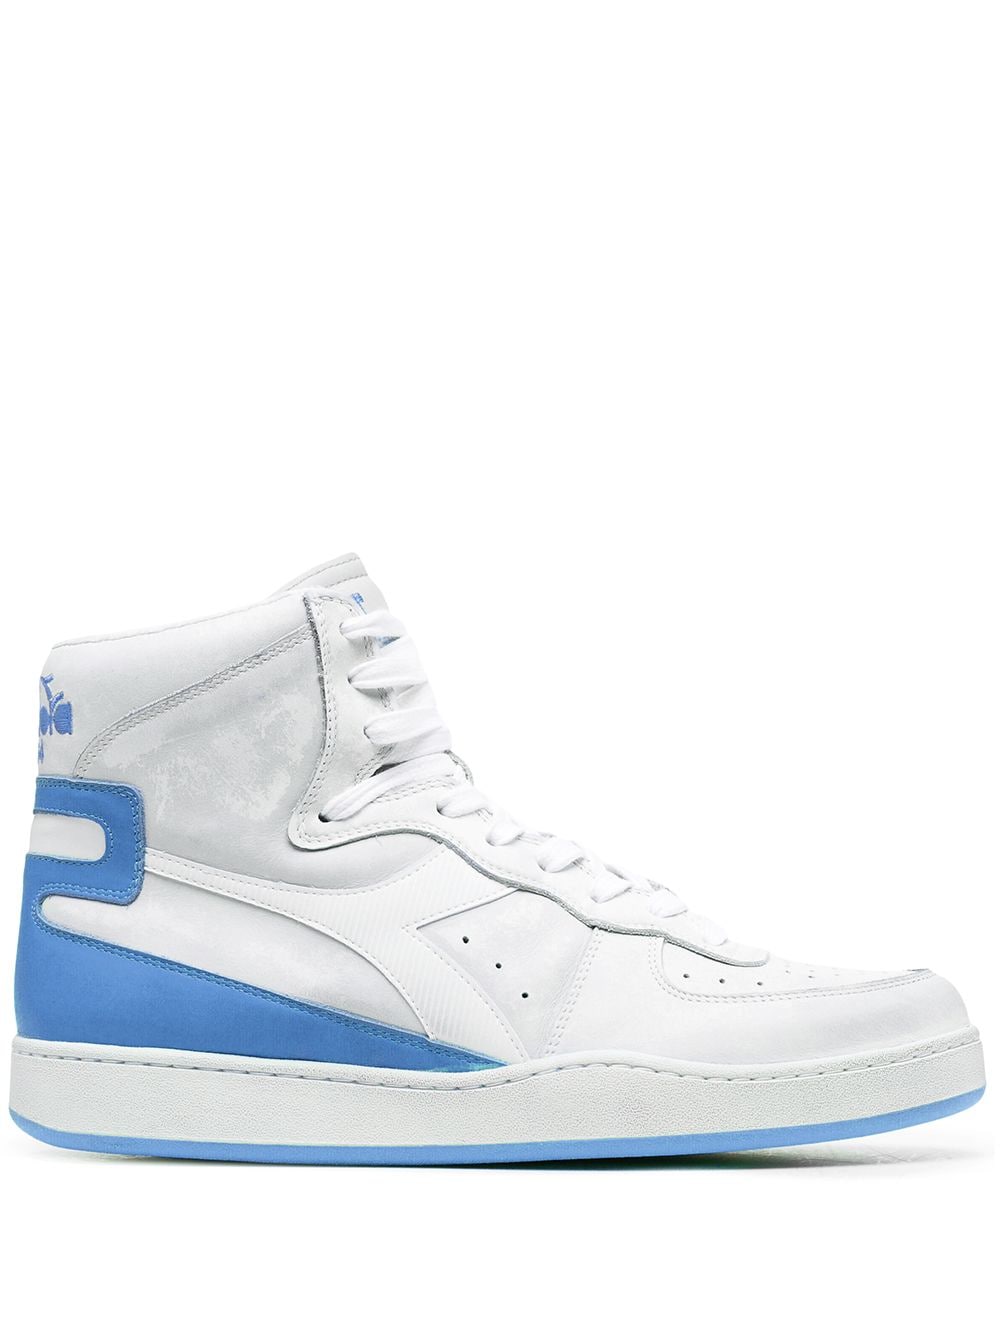 Image 1 of Diadora high-top panelled leather sneakers